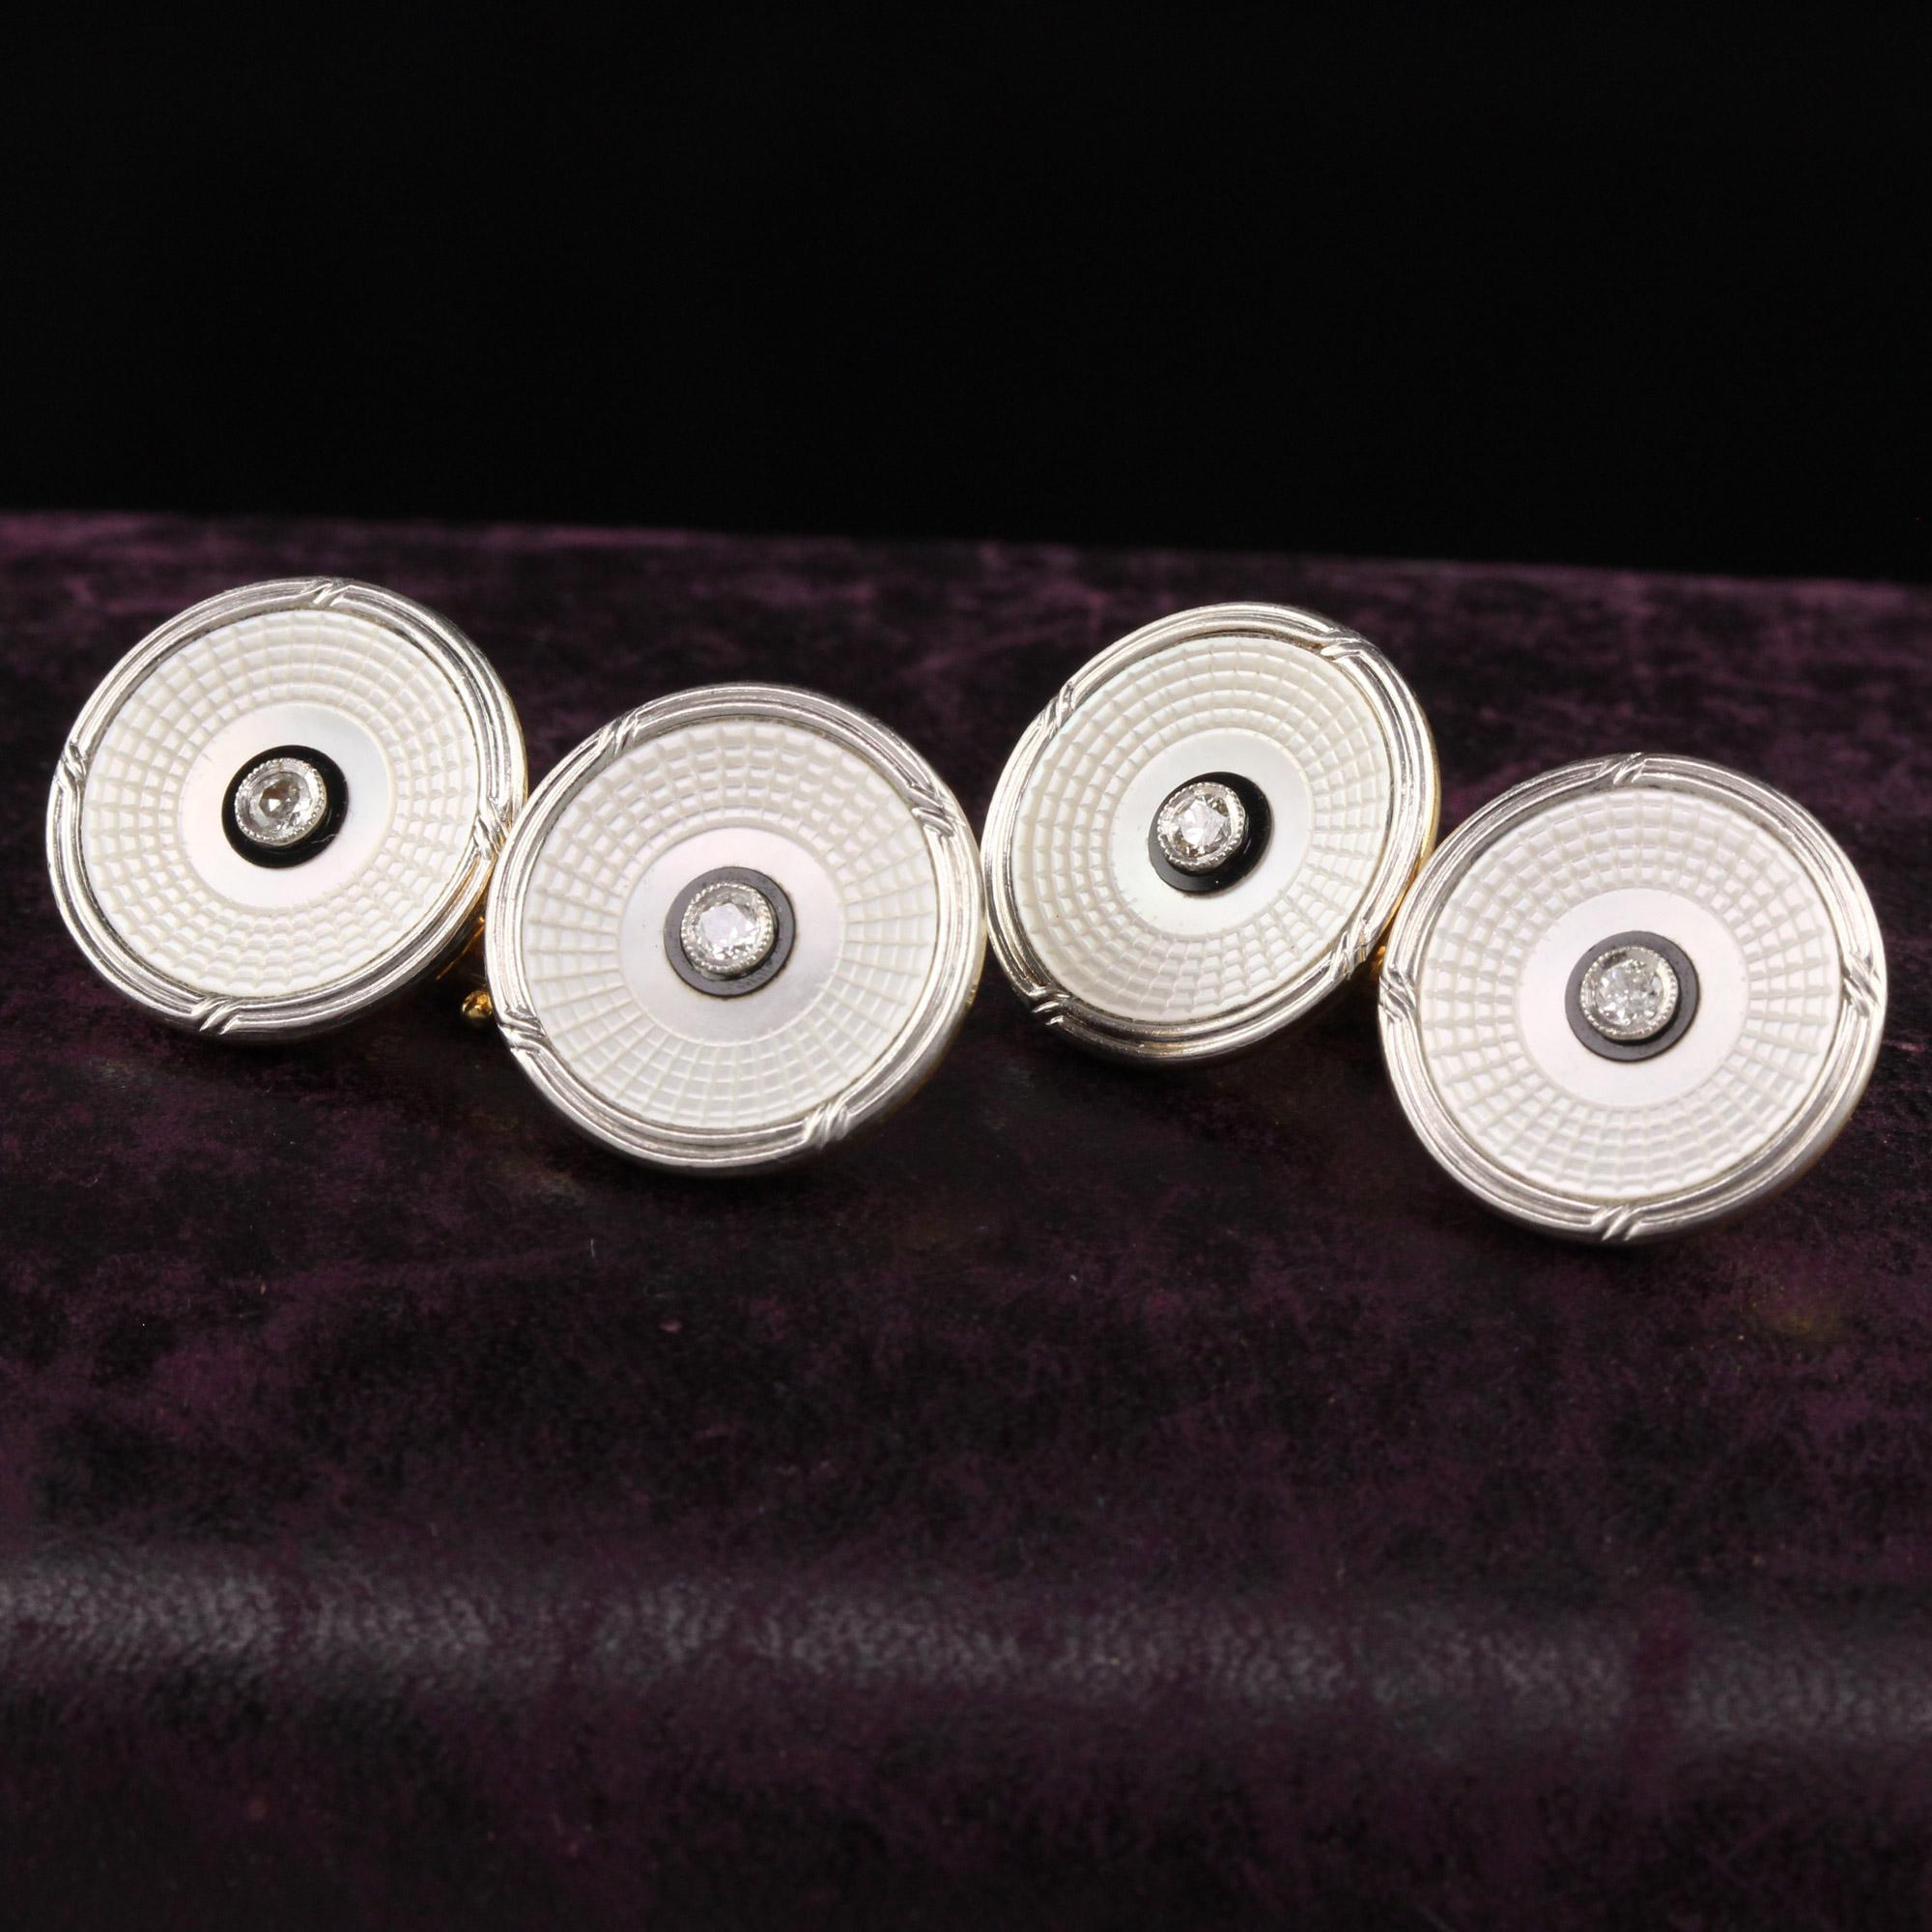 Beautiful Antique Art Deco 18K Yellow Gold Platinum Diamond Mother of Pearl Cufflinks. This beautiful pair of cufflinks has an old mine cut diamond in the middle of a beautifully engraved mother of pearl panel that has enamel on it as well.

Item